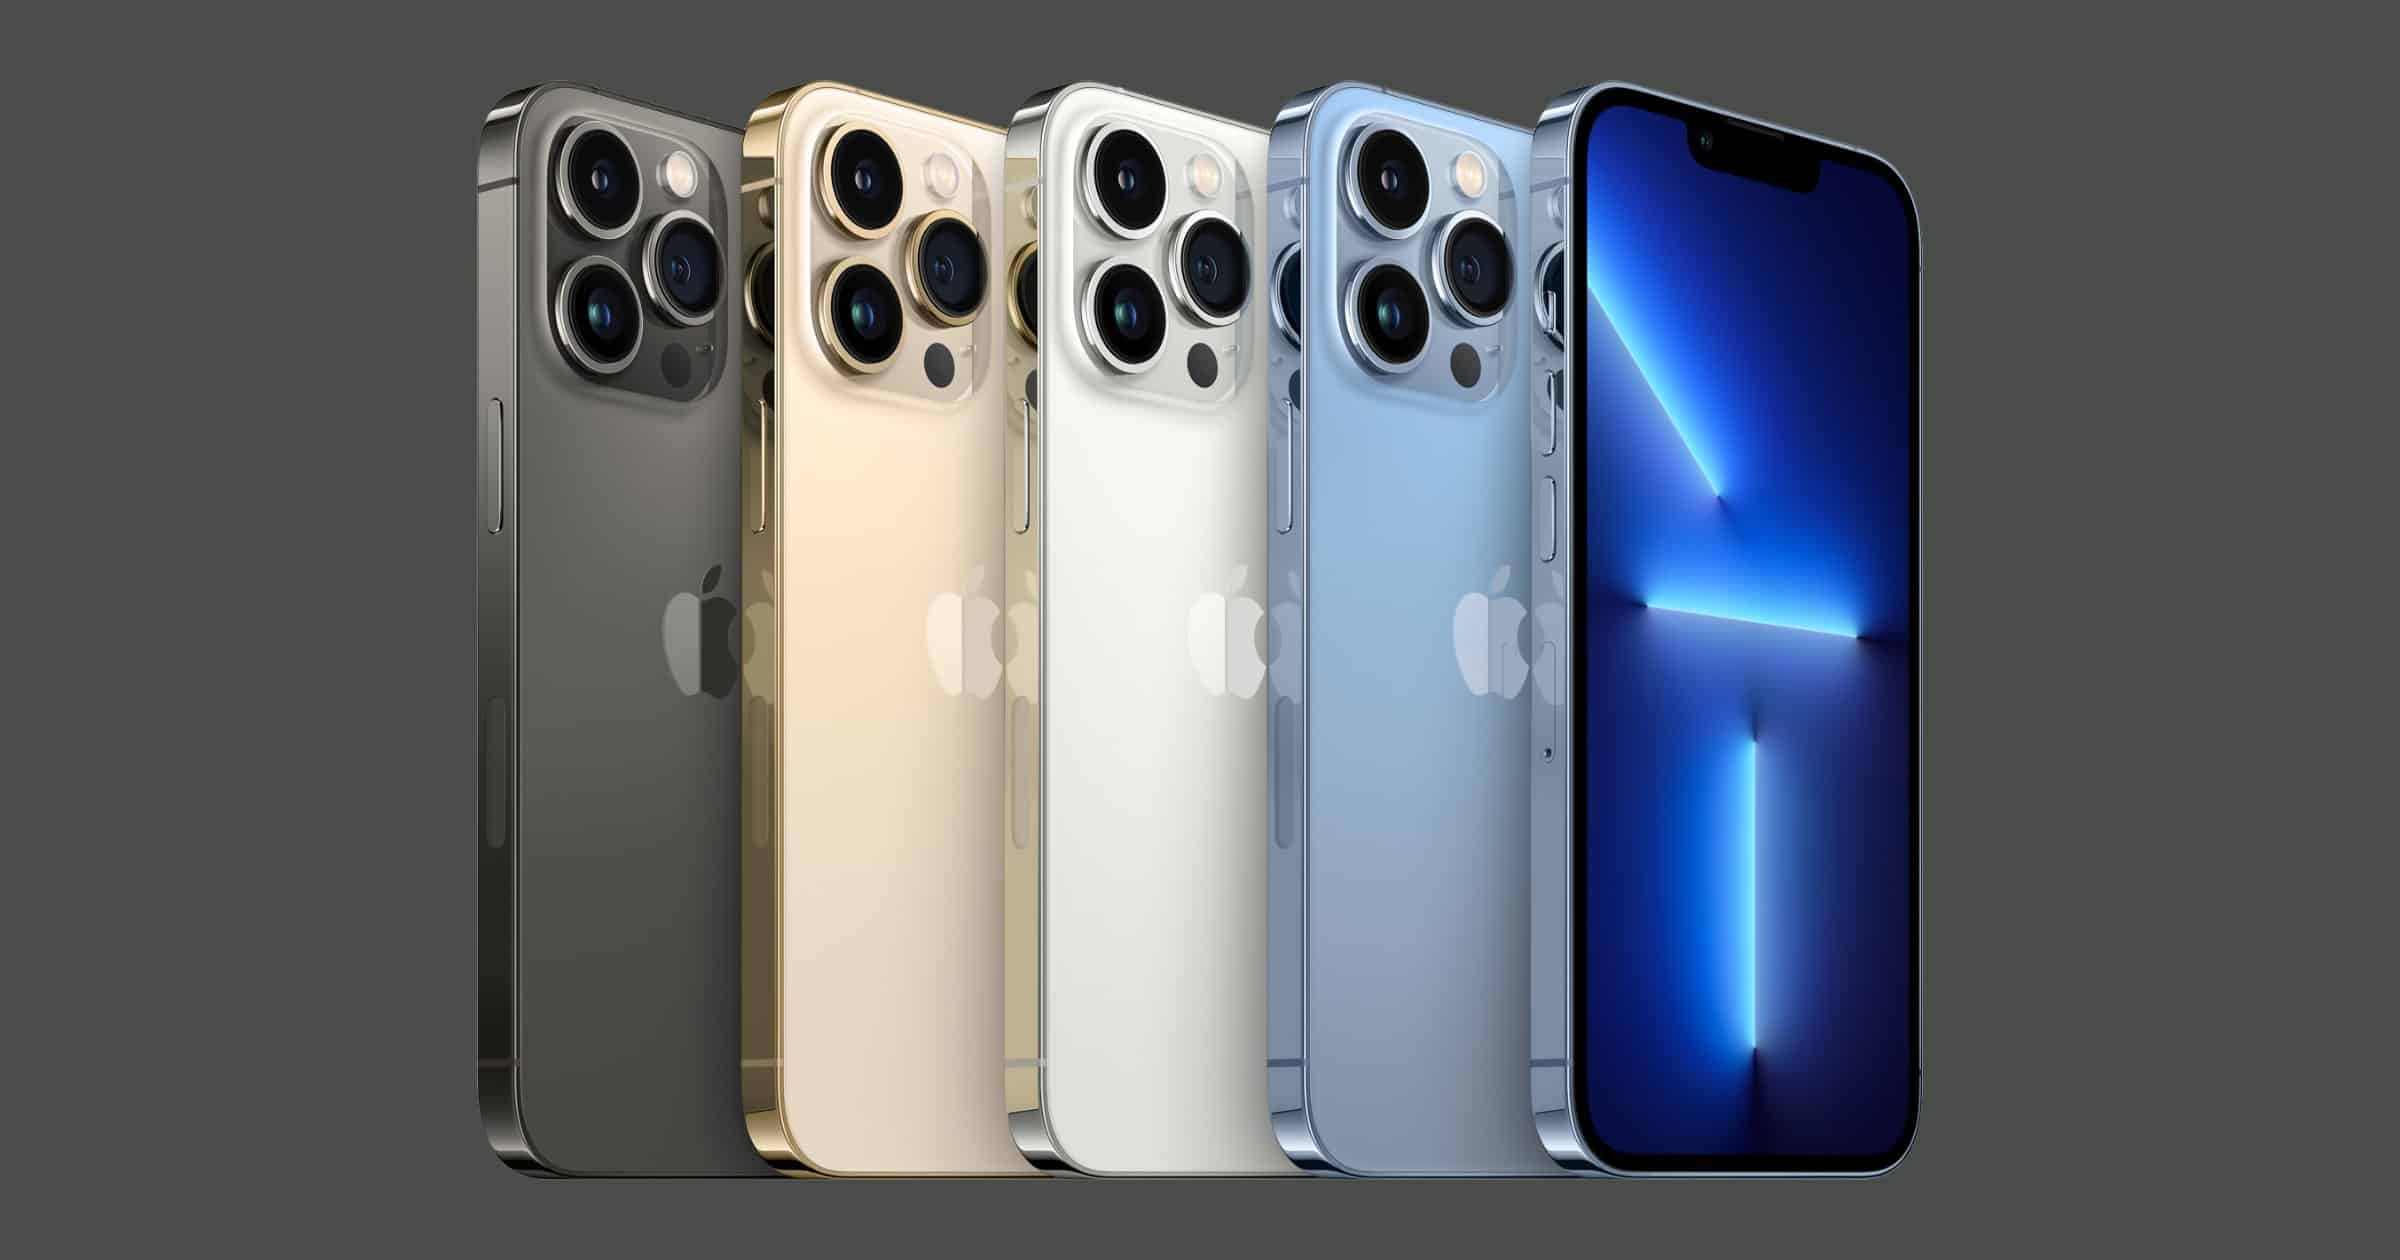 iPhone 13 pro lineup